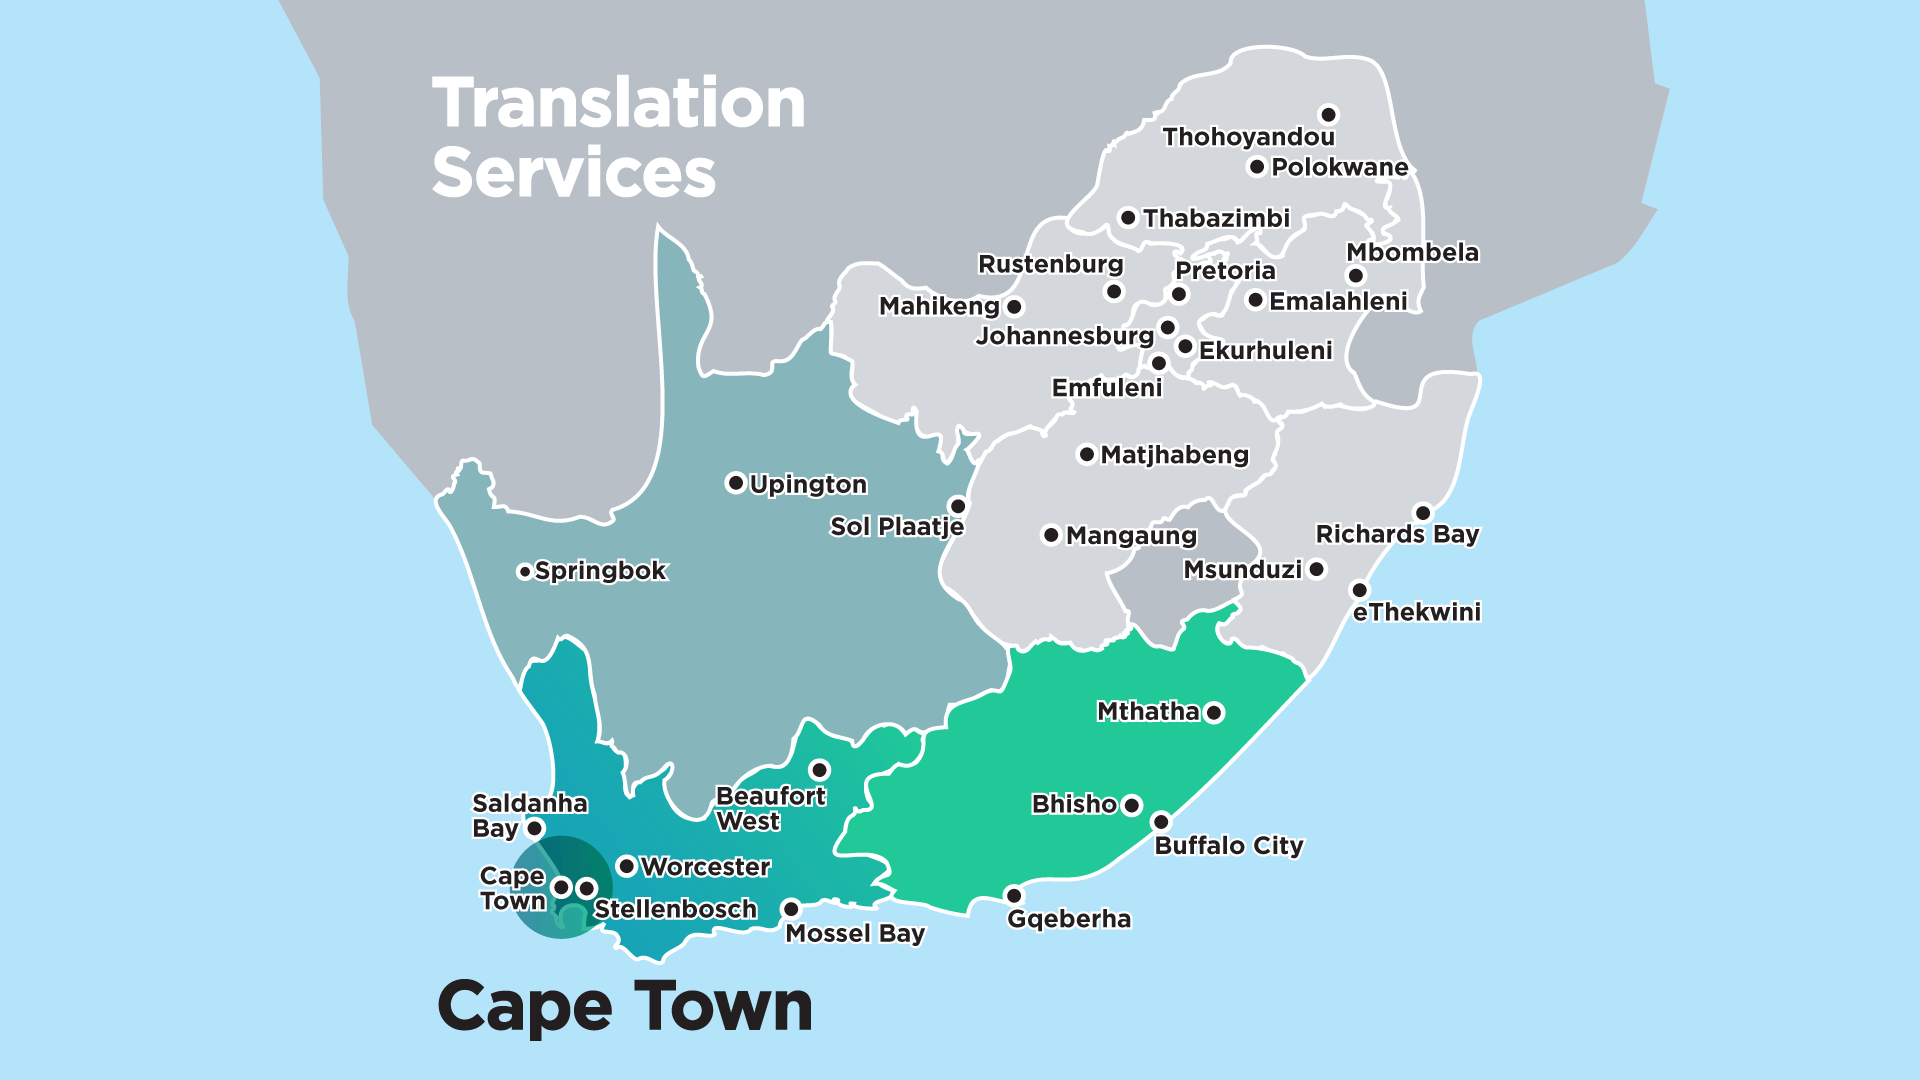 Translation Services for the Languages of Cape Town